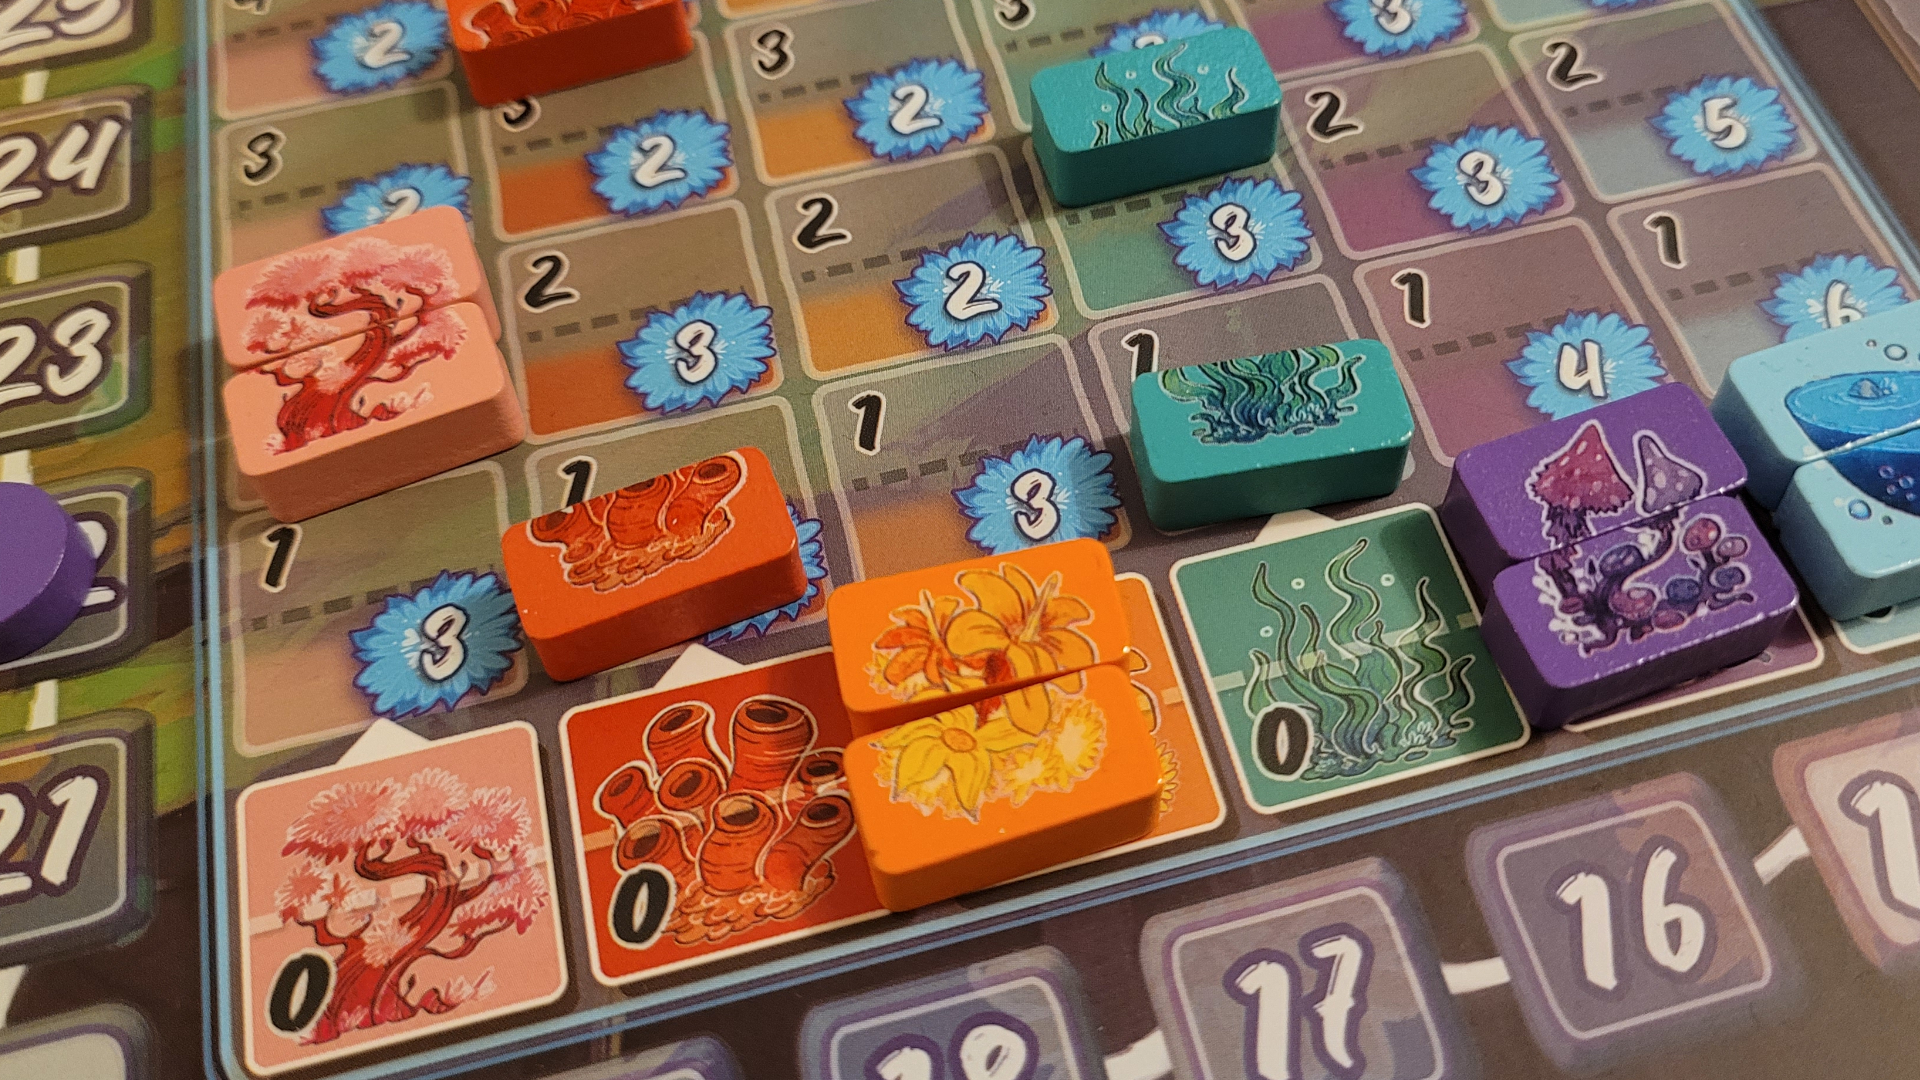 Arborea tokens on a board of numbers and colors